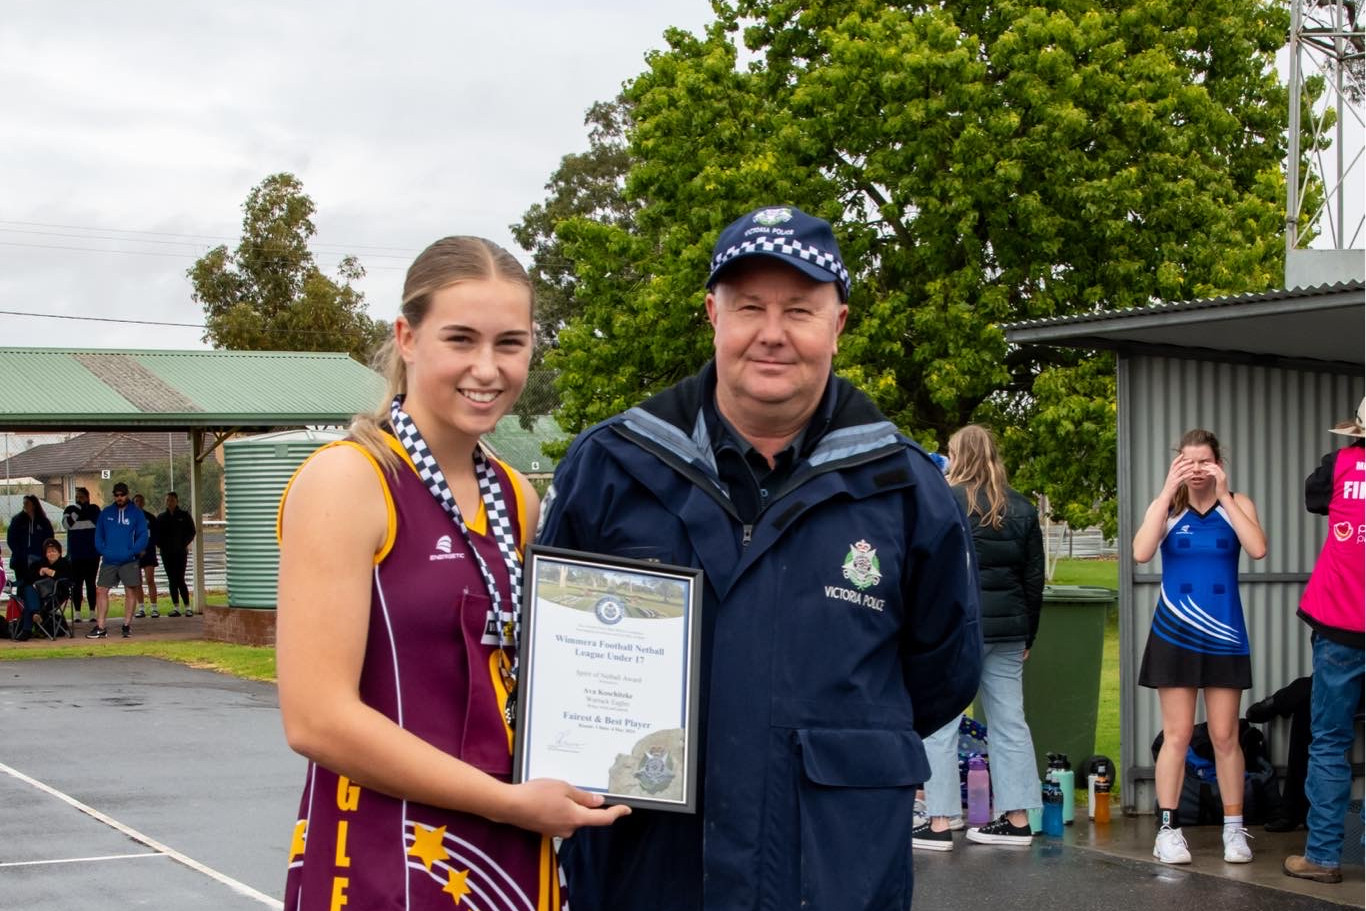 Ava Koschitzke photographed receiving her award from Beulah Police Officer Leading Senior Constable Shayne Riggall.